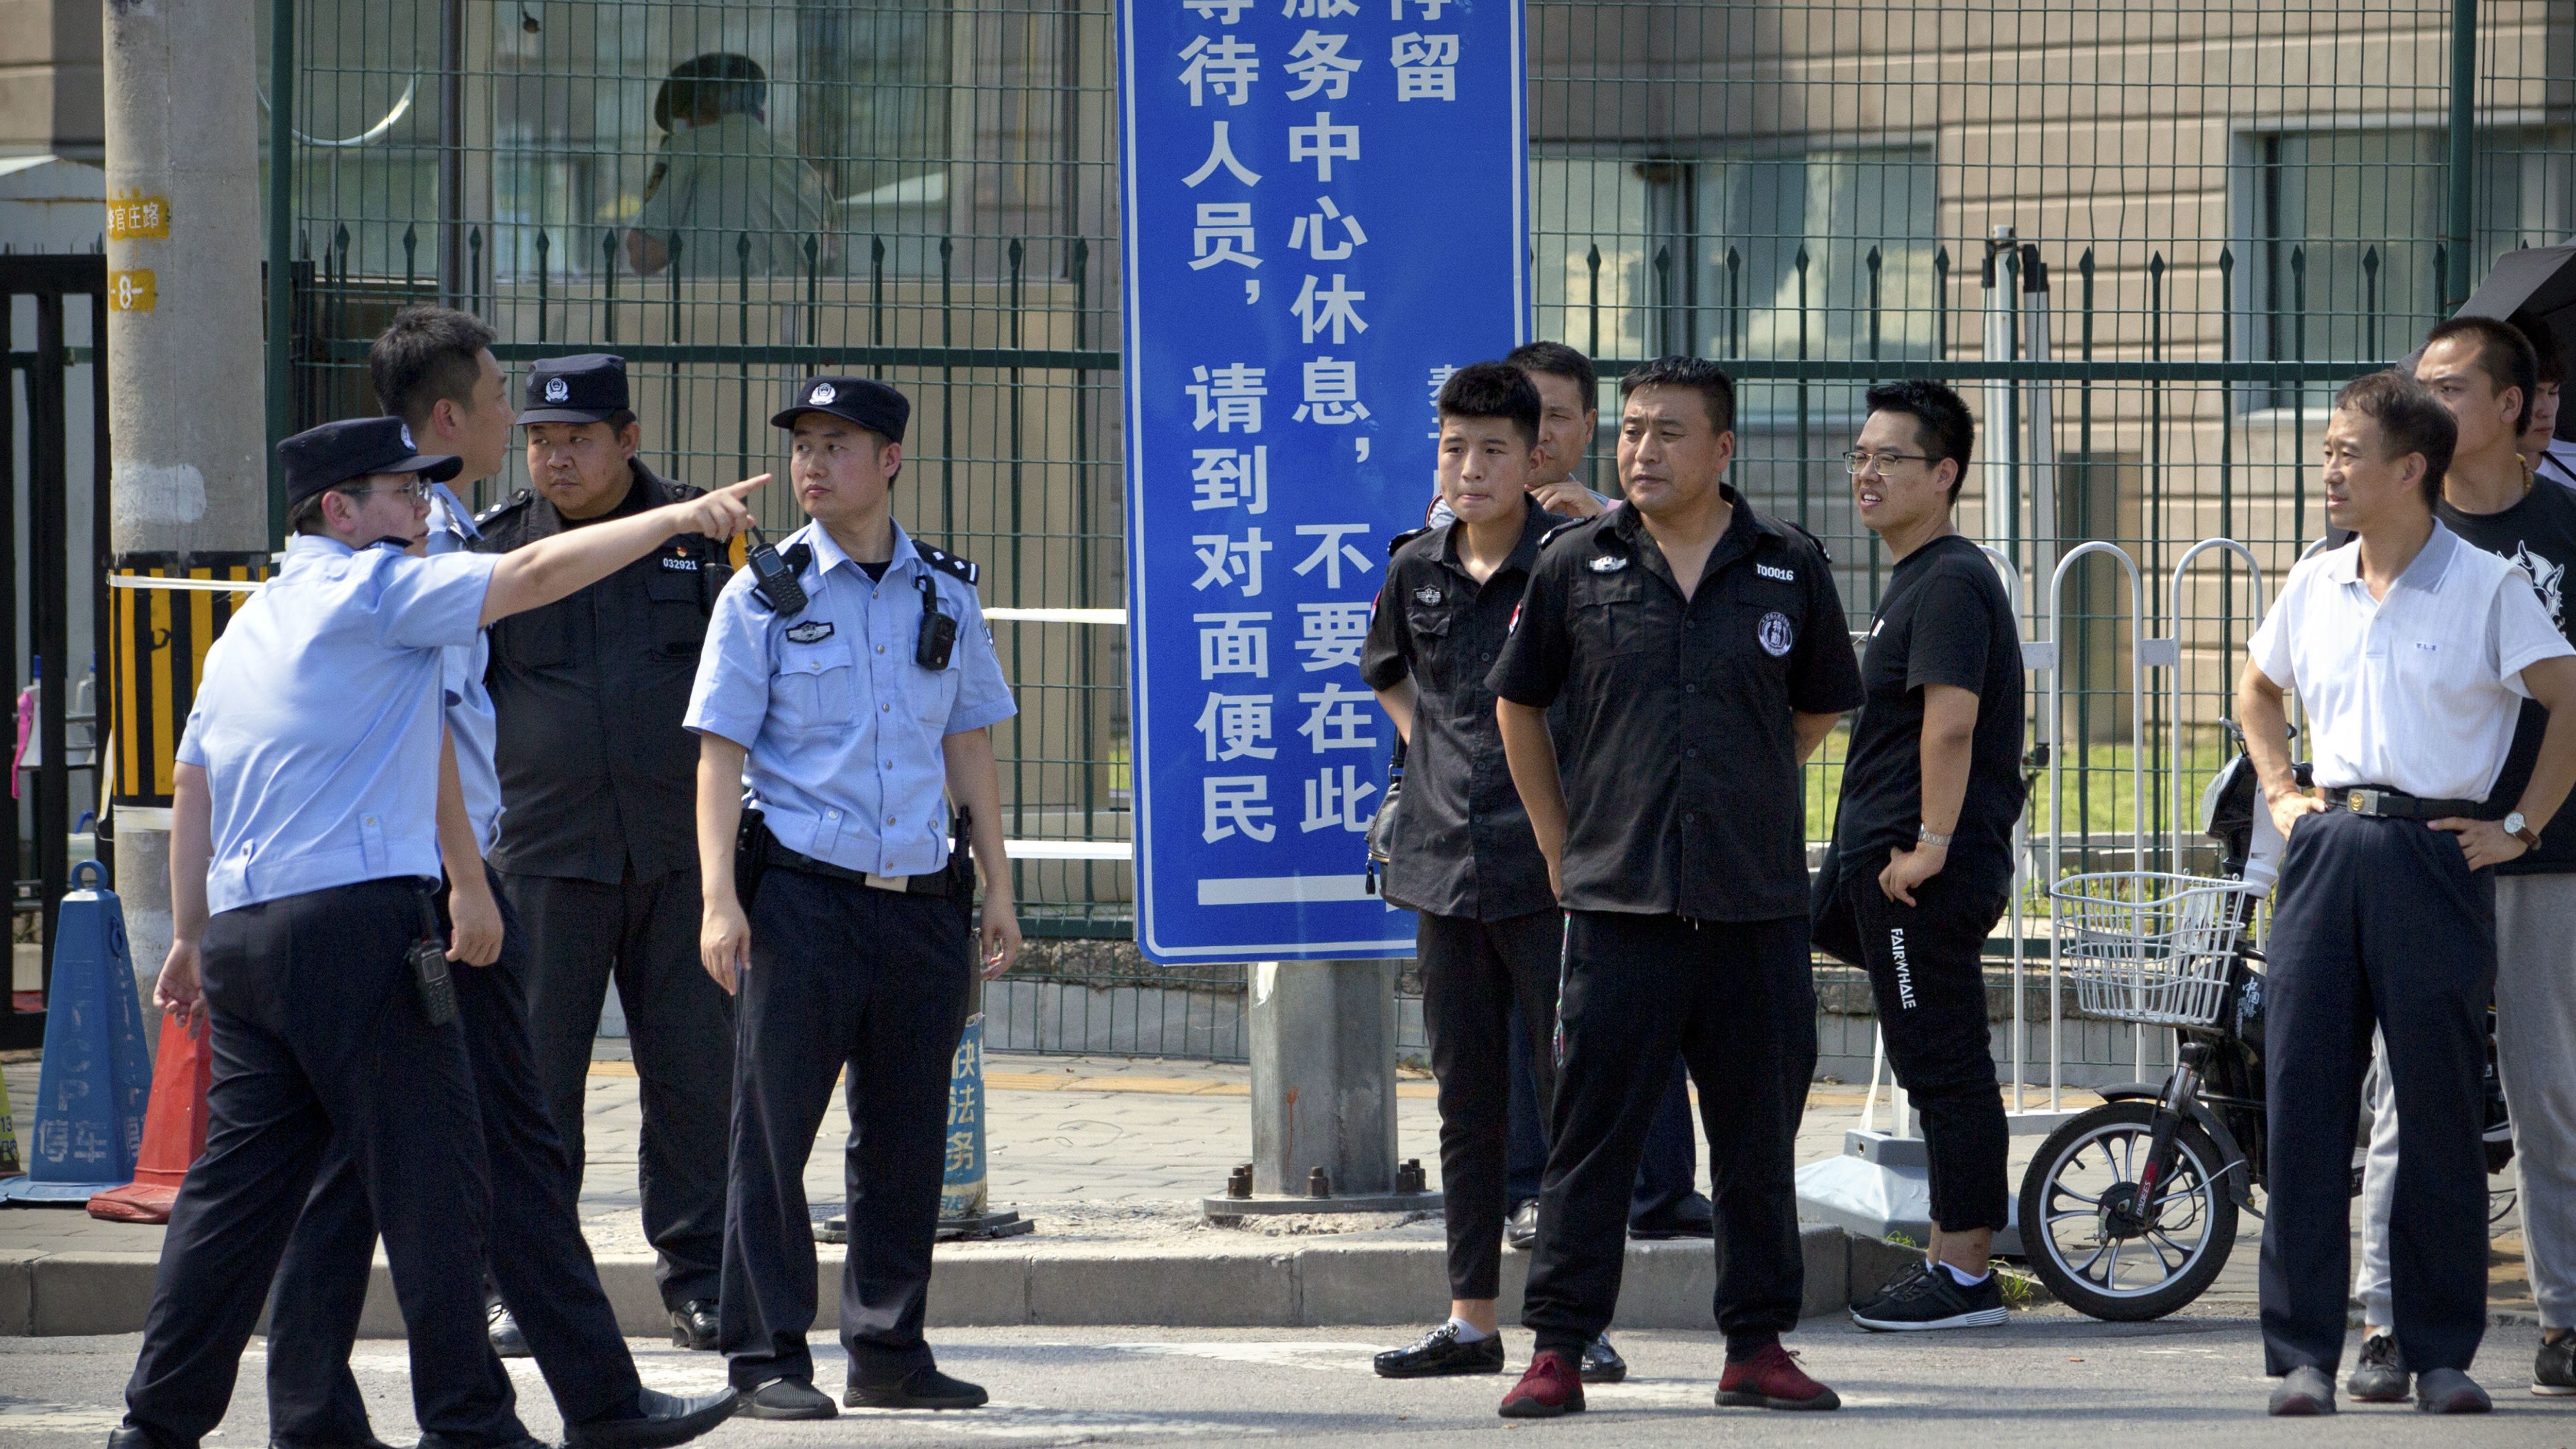 Chinese security personnel stand outside the U.S. Embassy, in the background, after a reported blast occurred nearby on July 26.